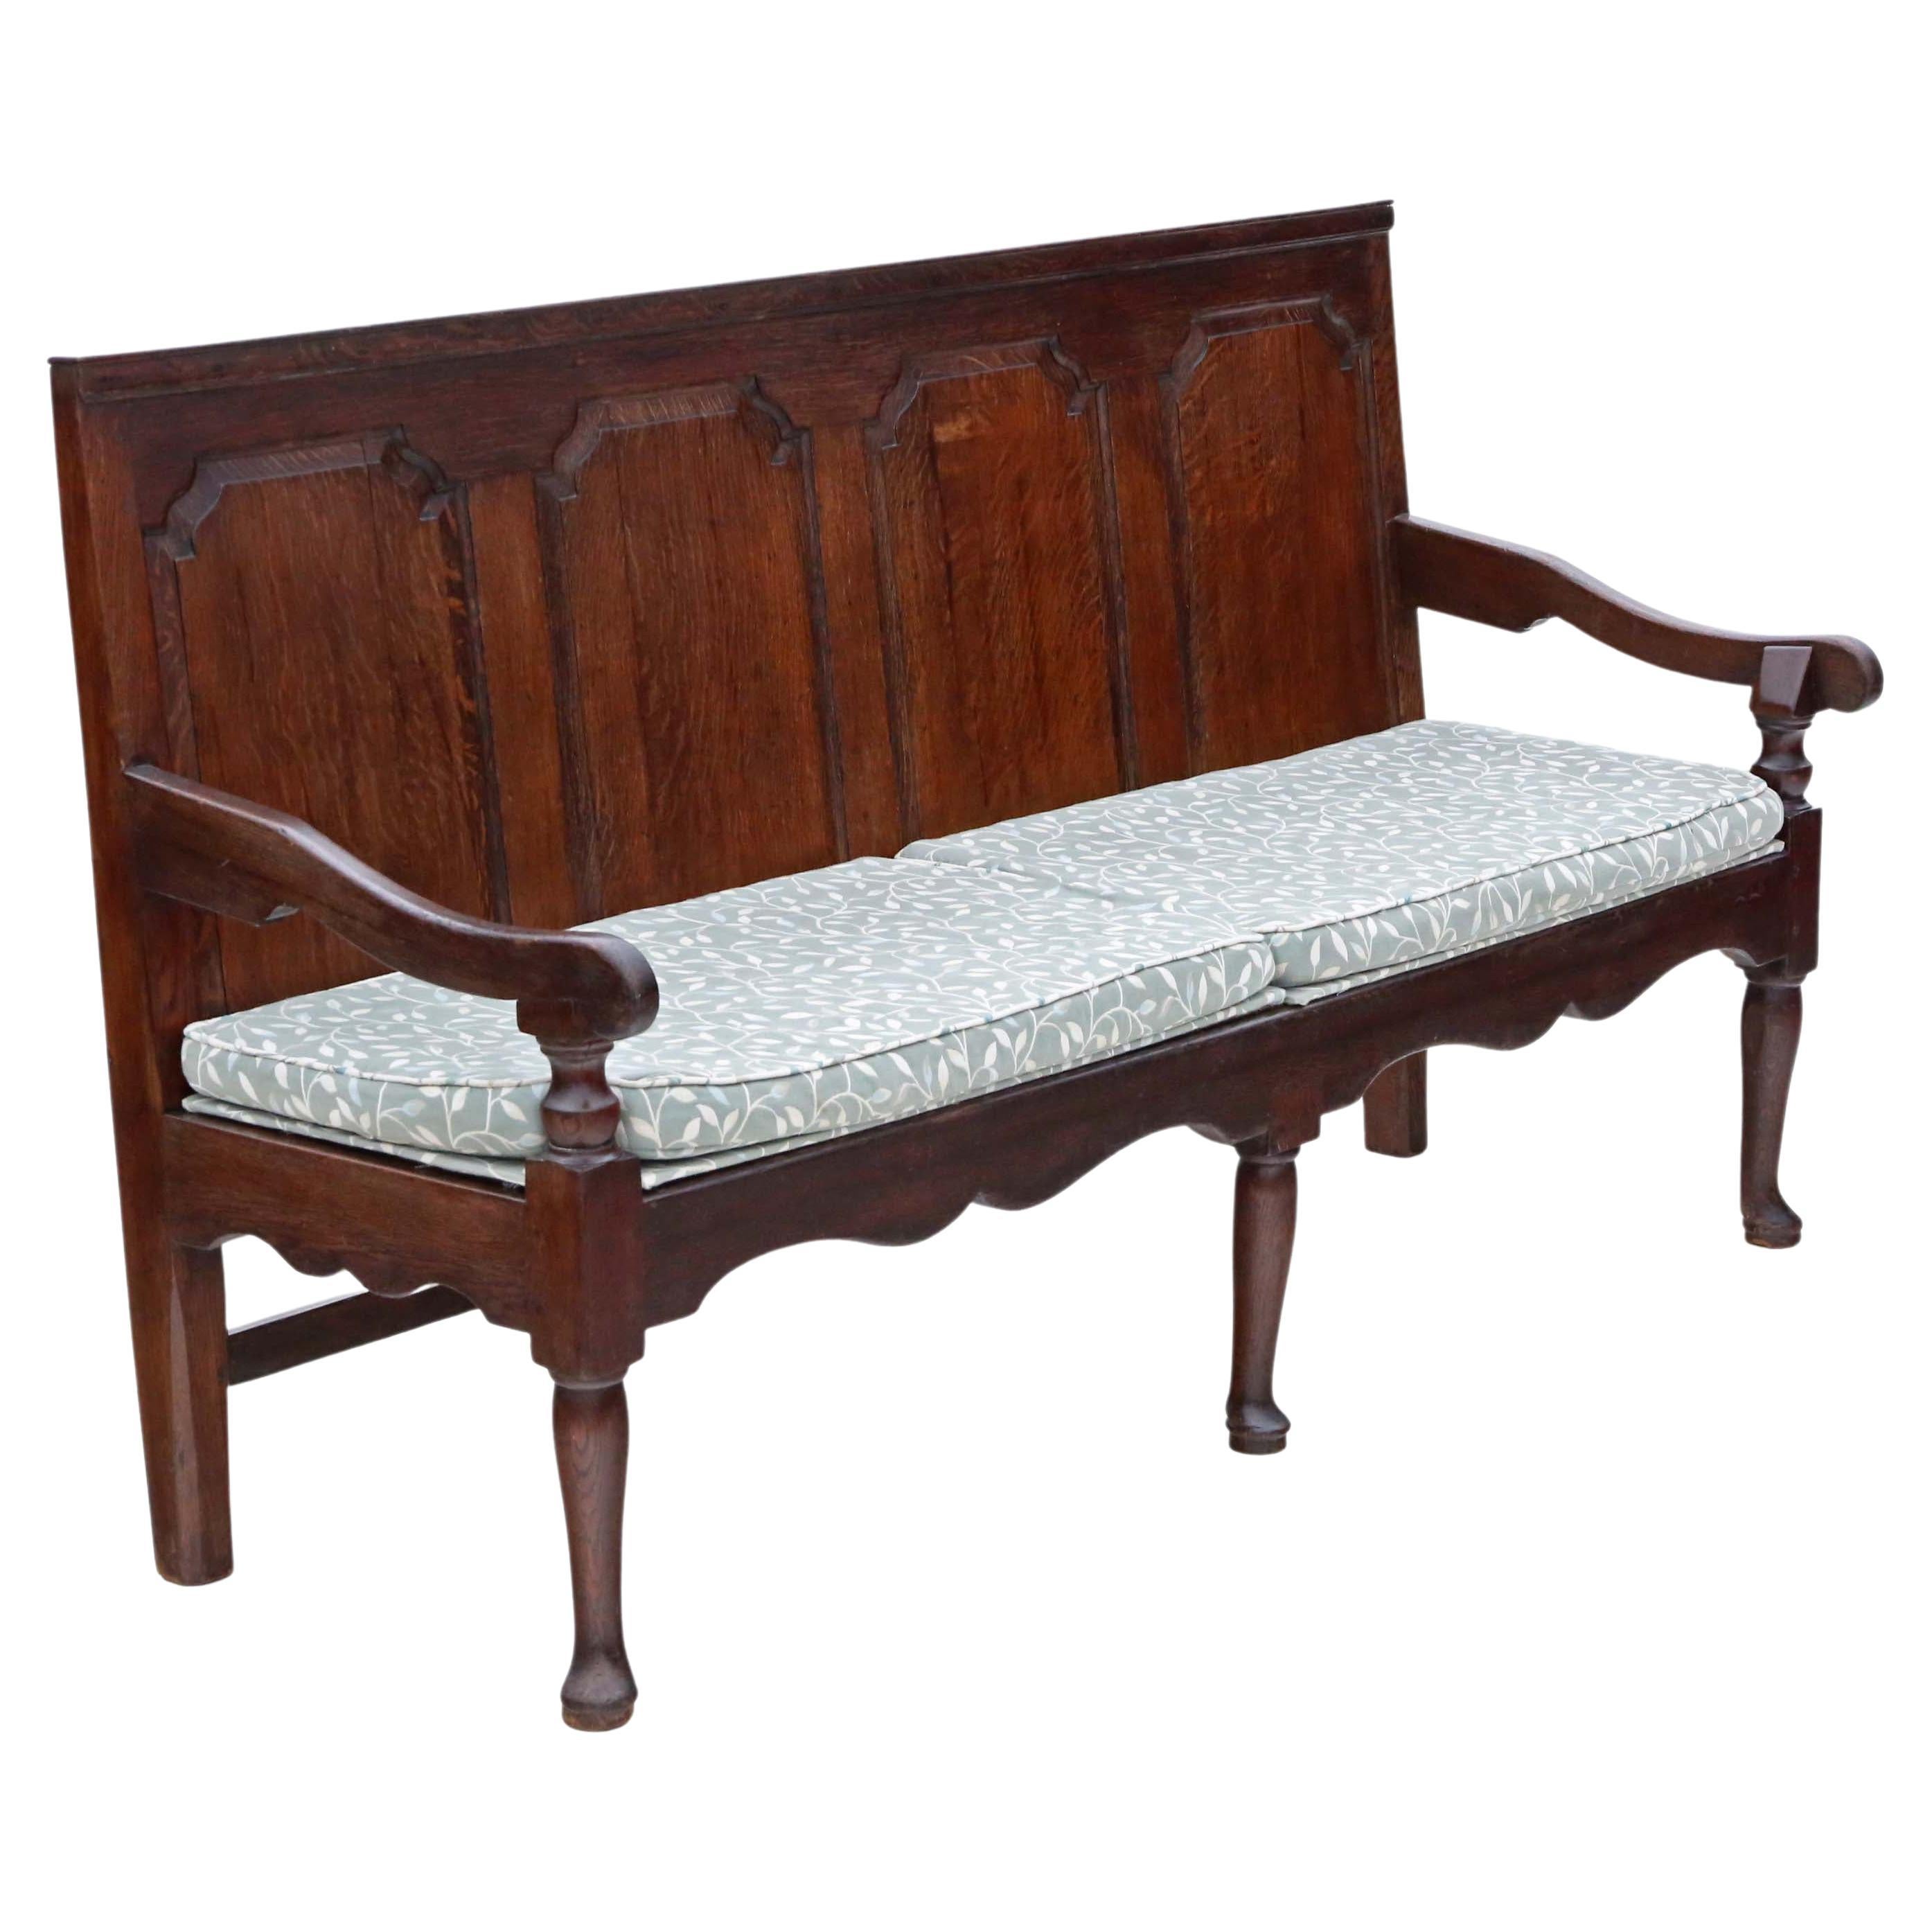 What is an antique settle?